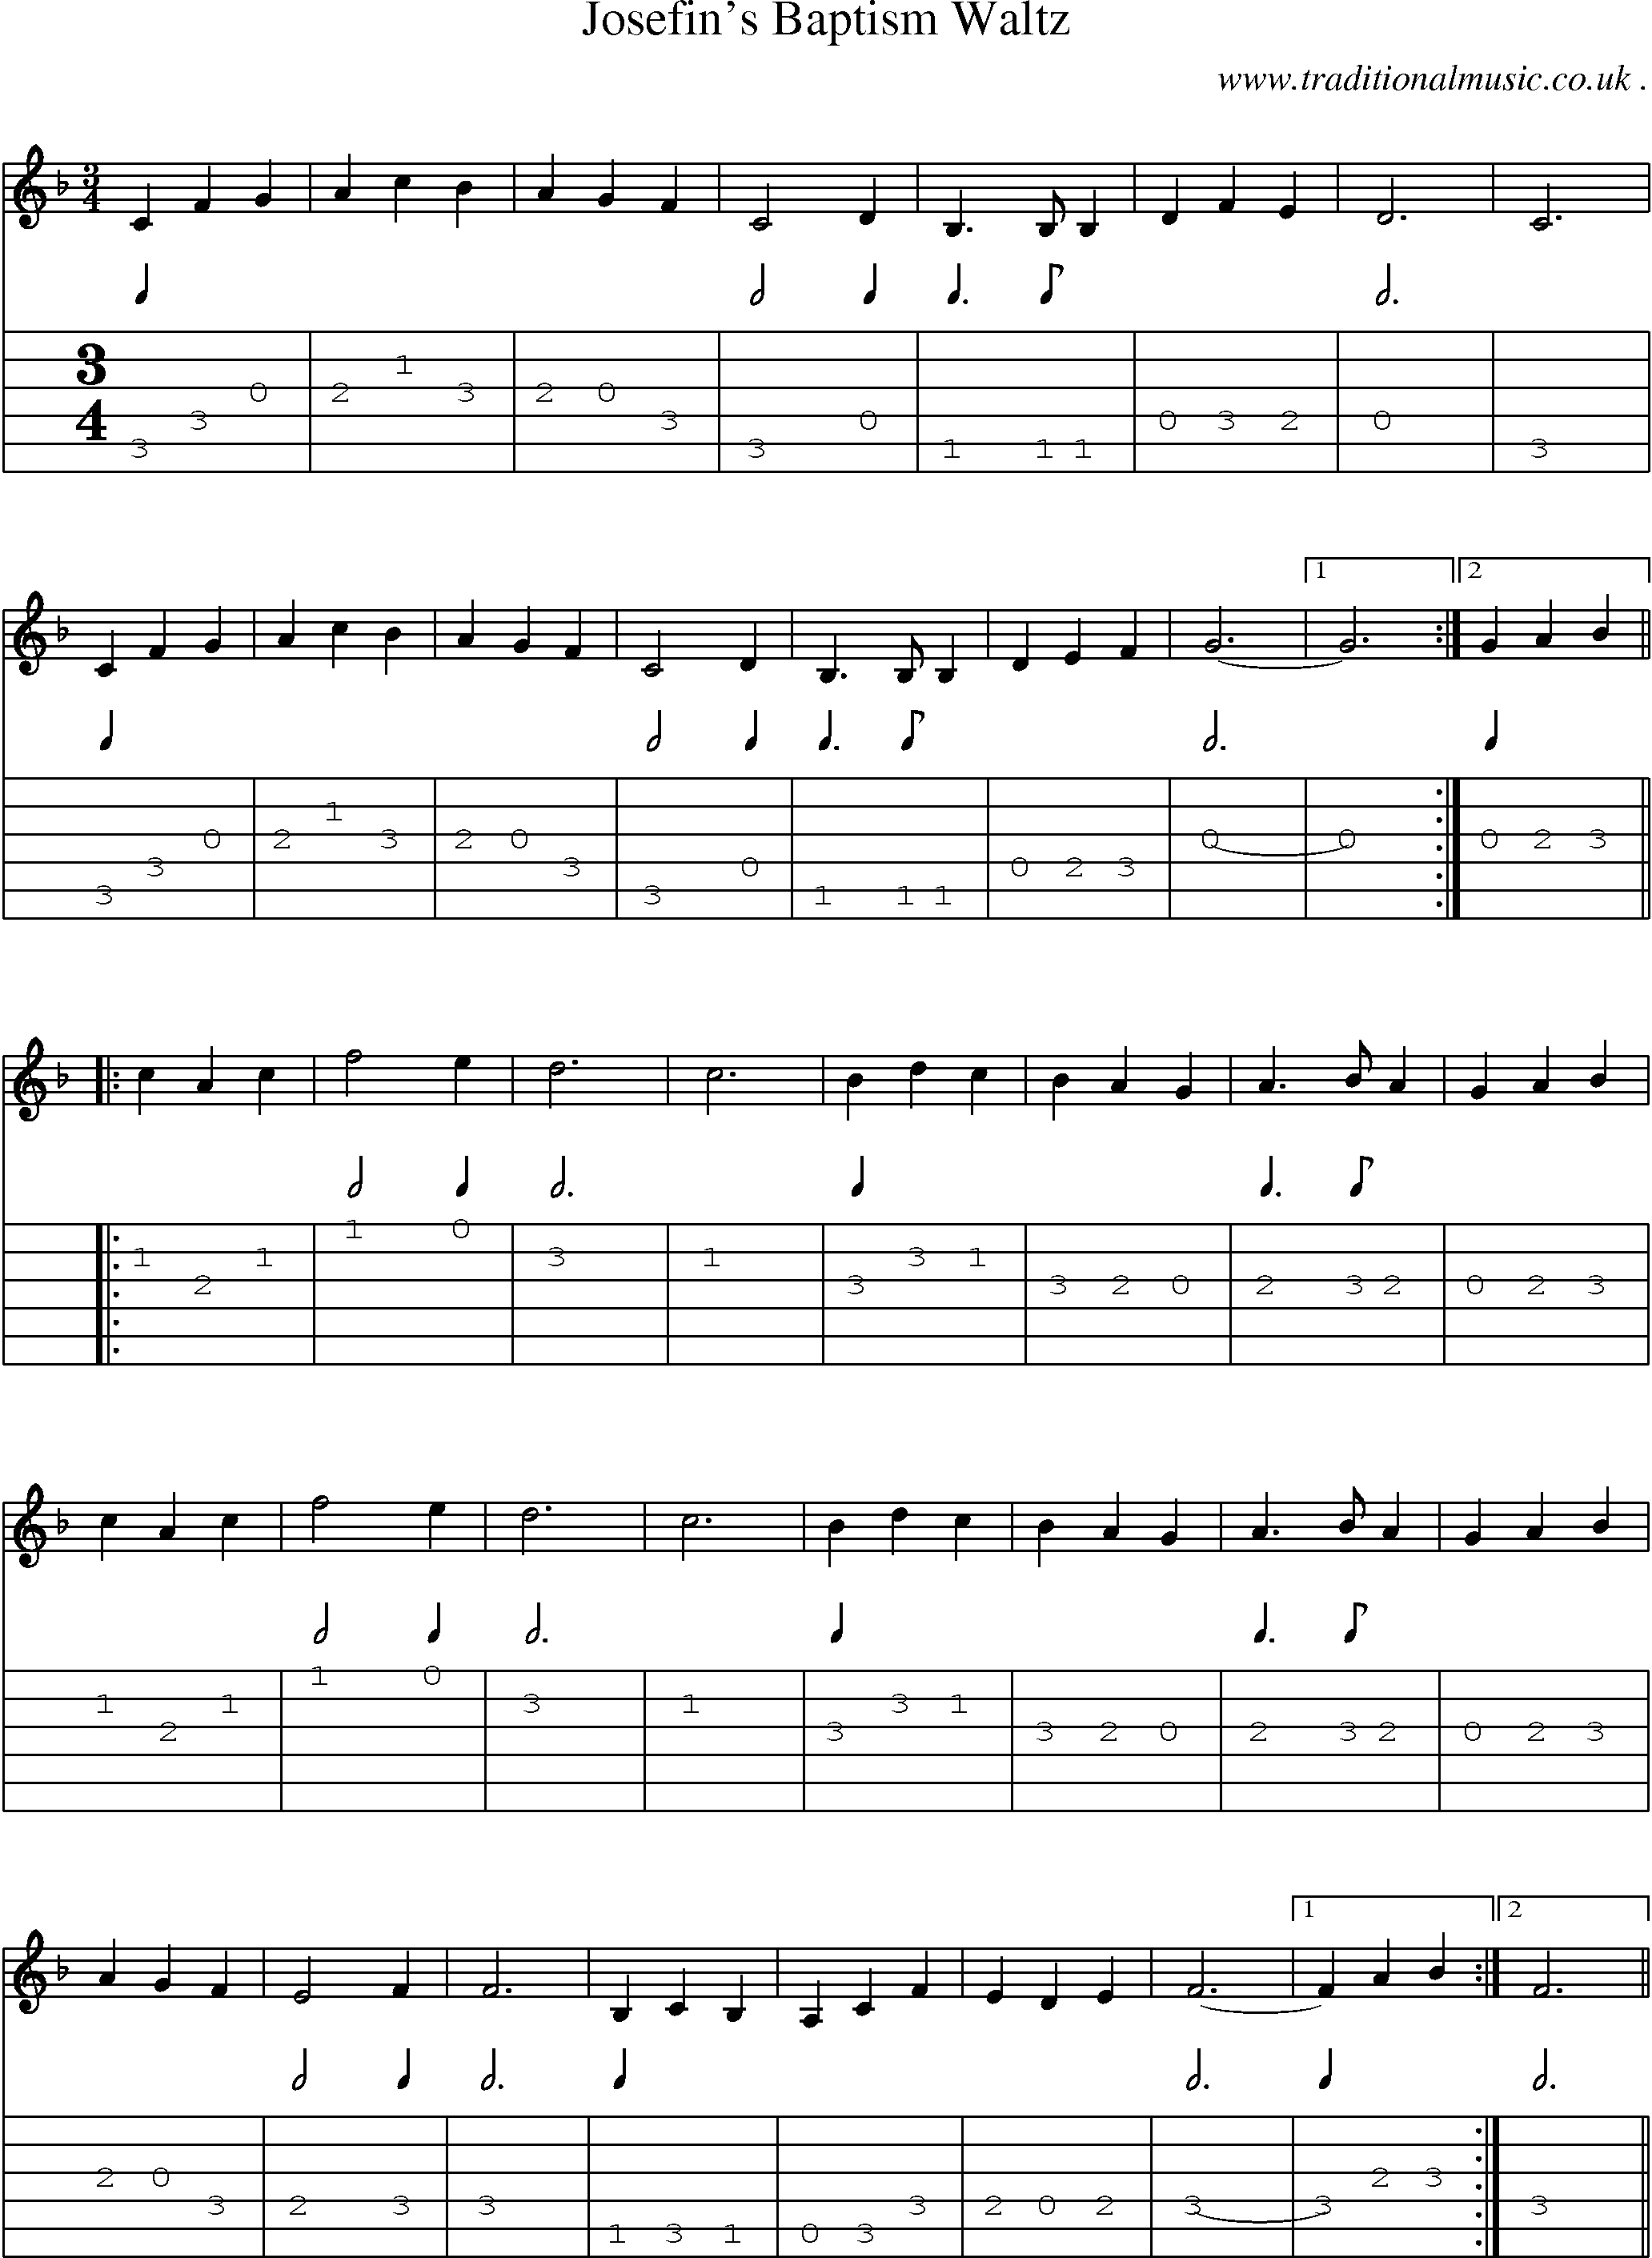 Music Score and Guitar Tabs for Josefins Baptism Waltz